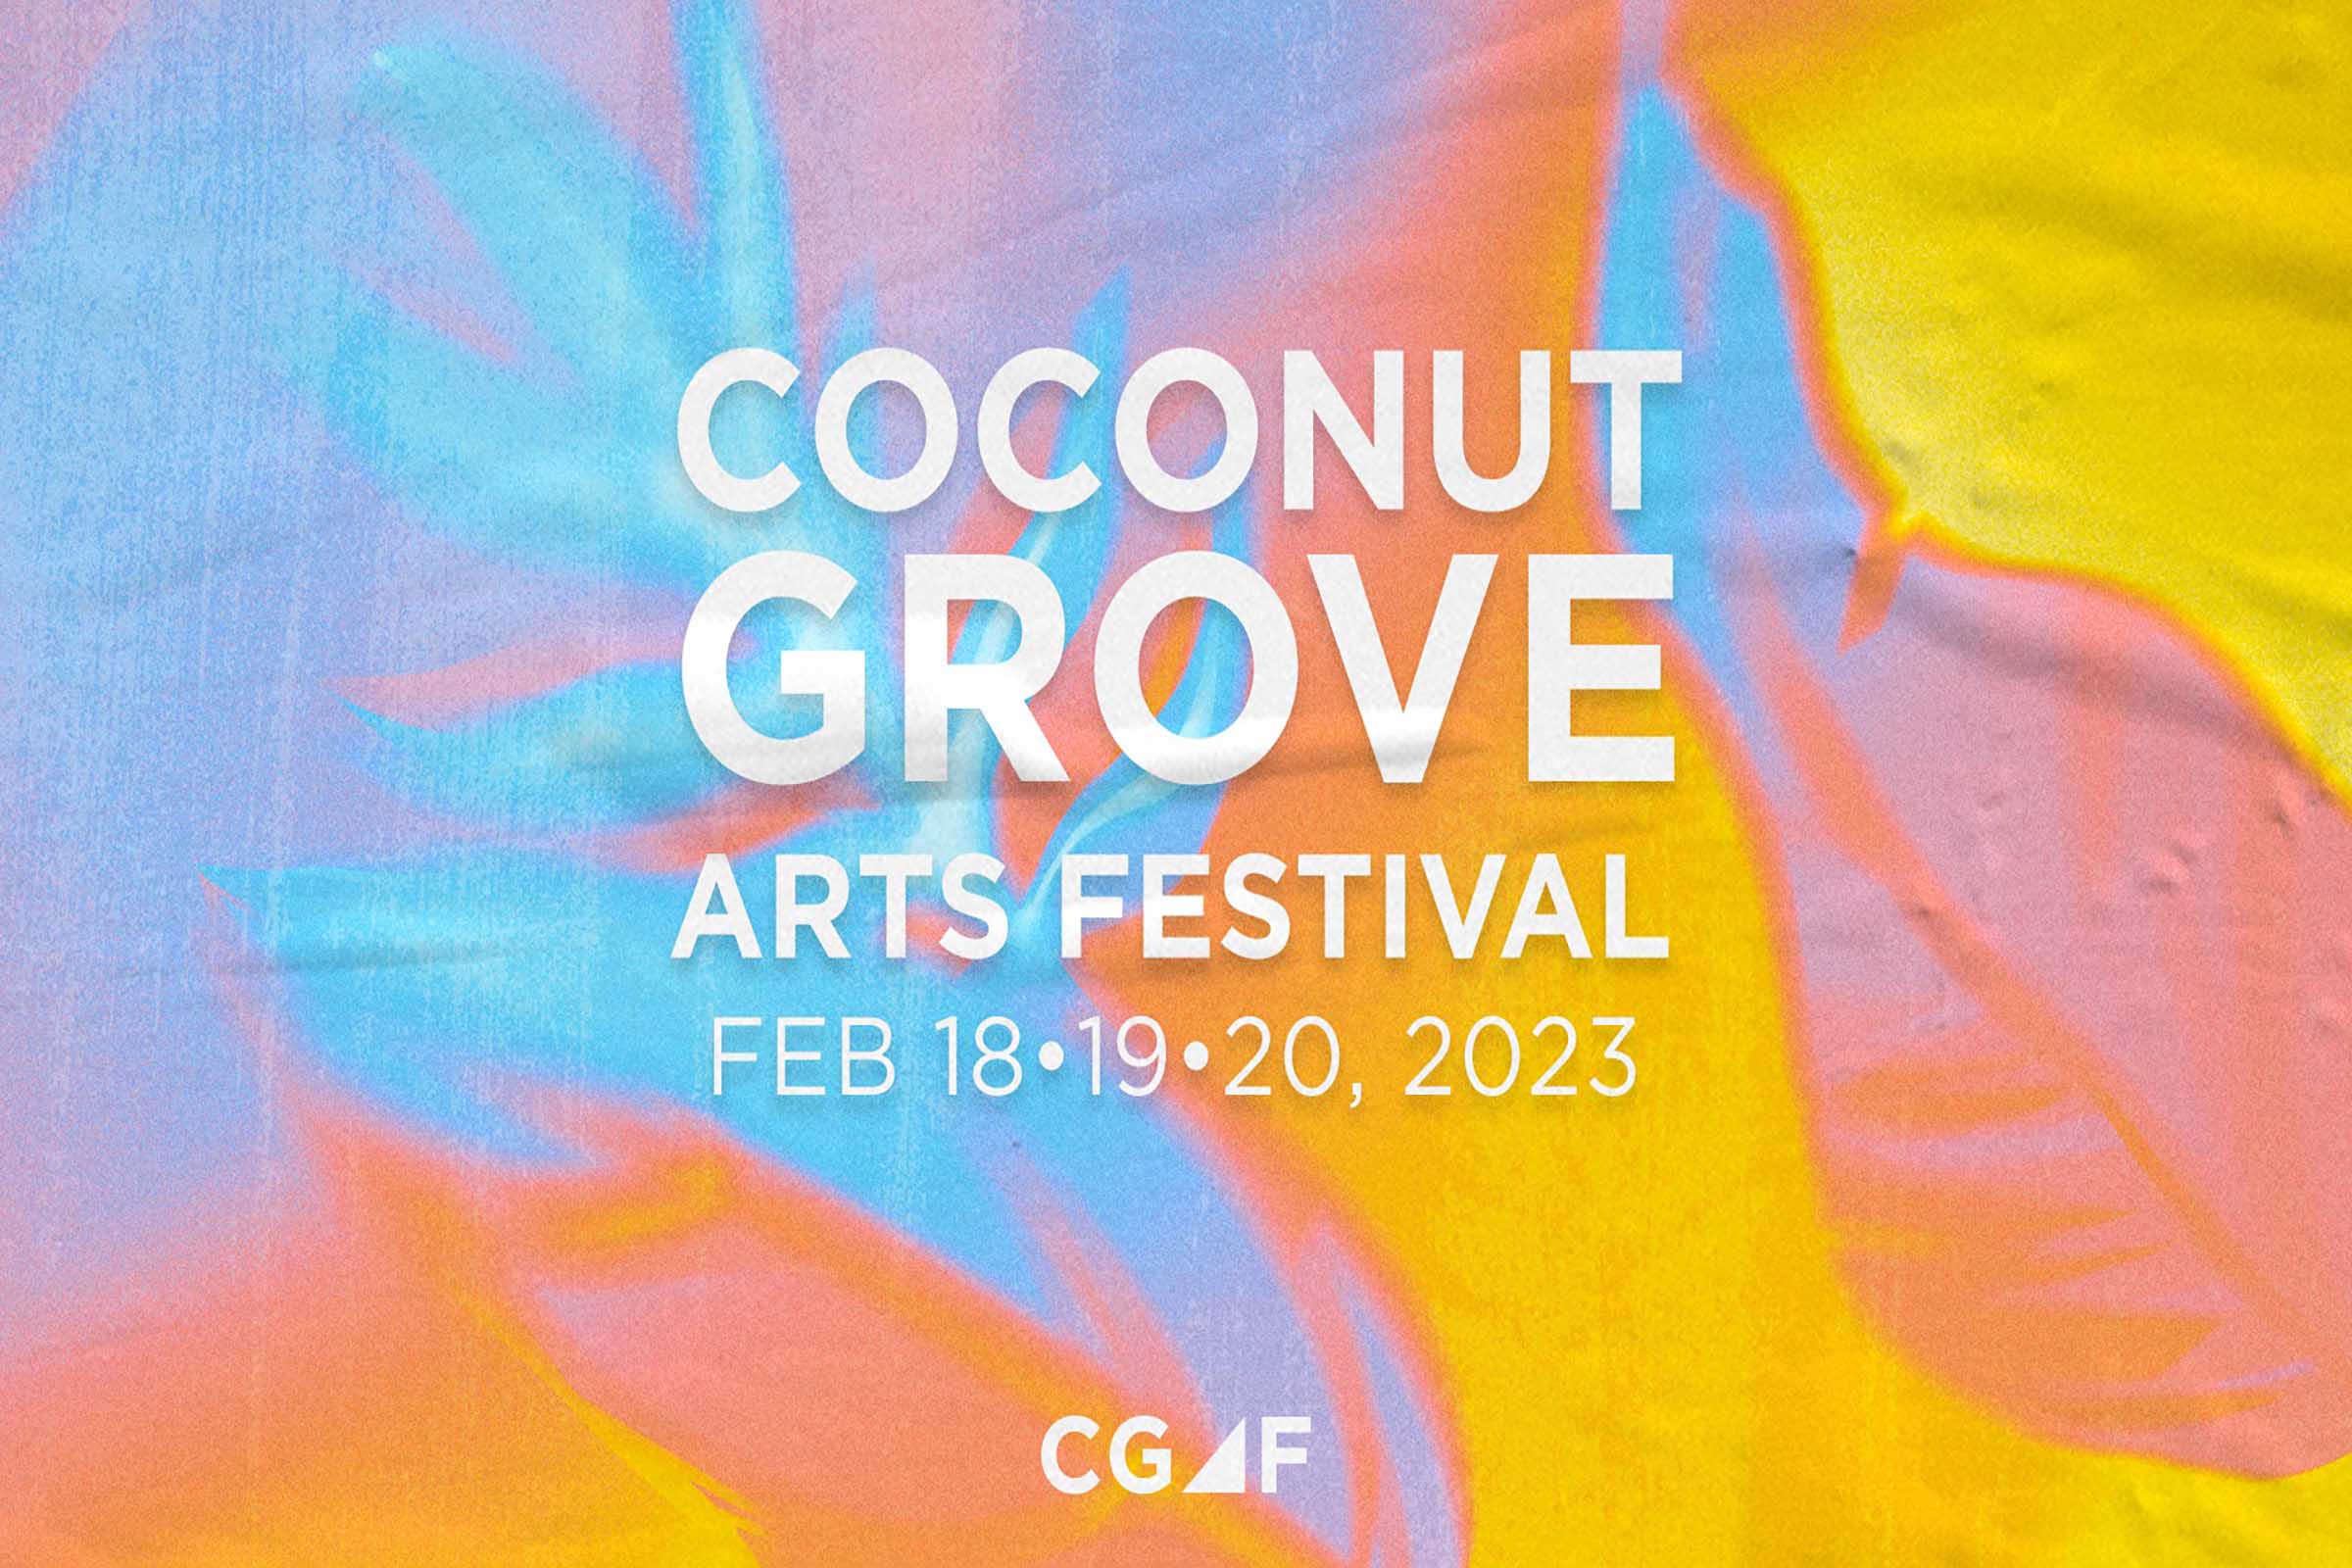 Inside The Selection Process For The Coconut Grove Arts Festival 2023